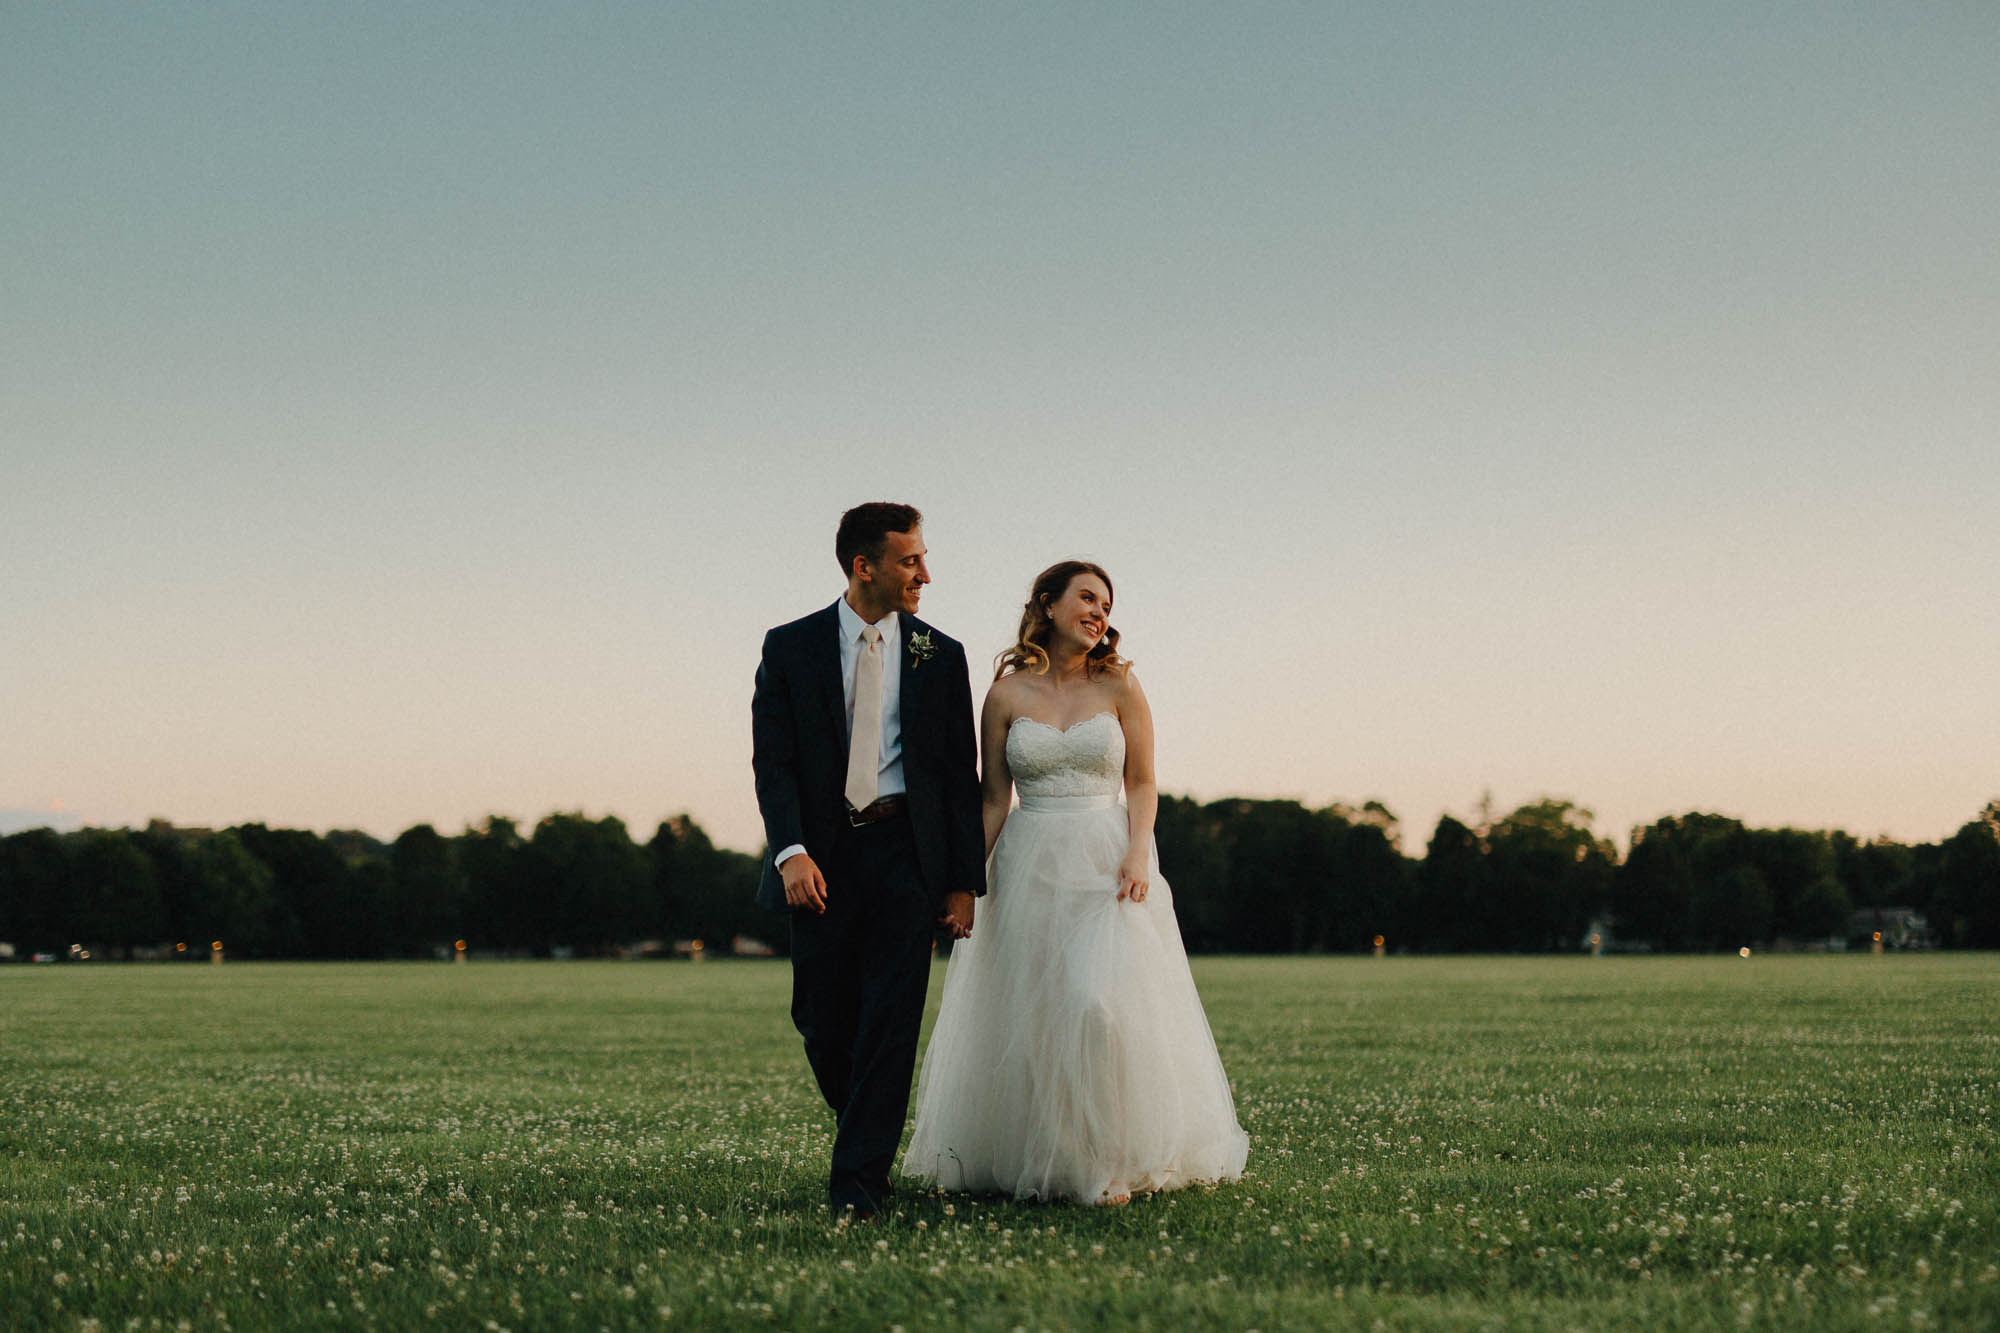 The Brauns are Wedding Photographers with a Natural, Honest Style